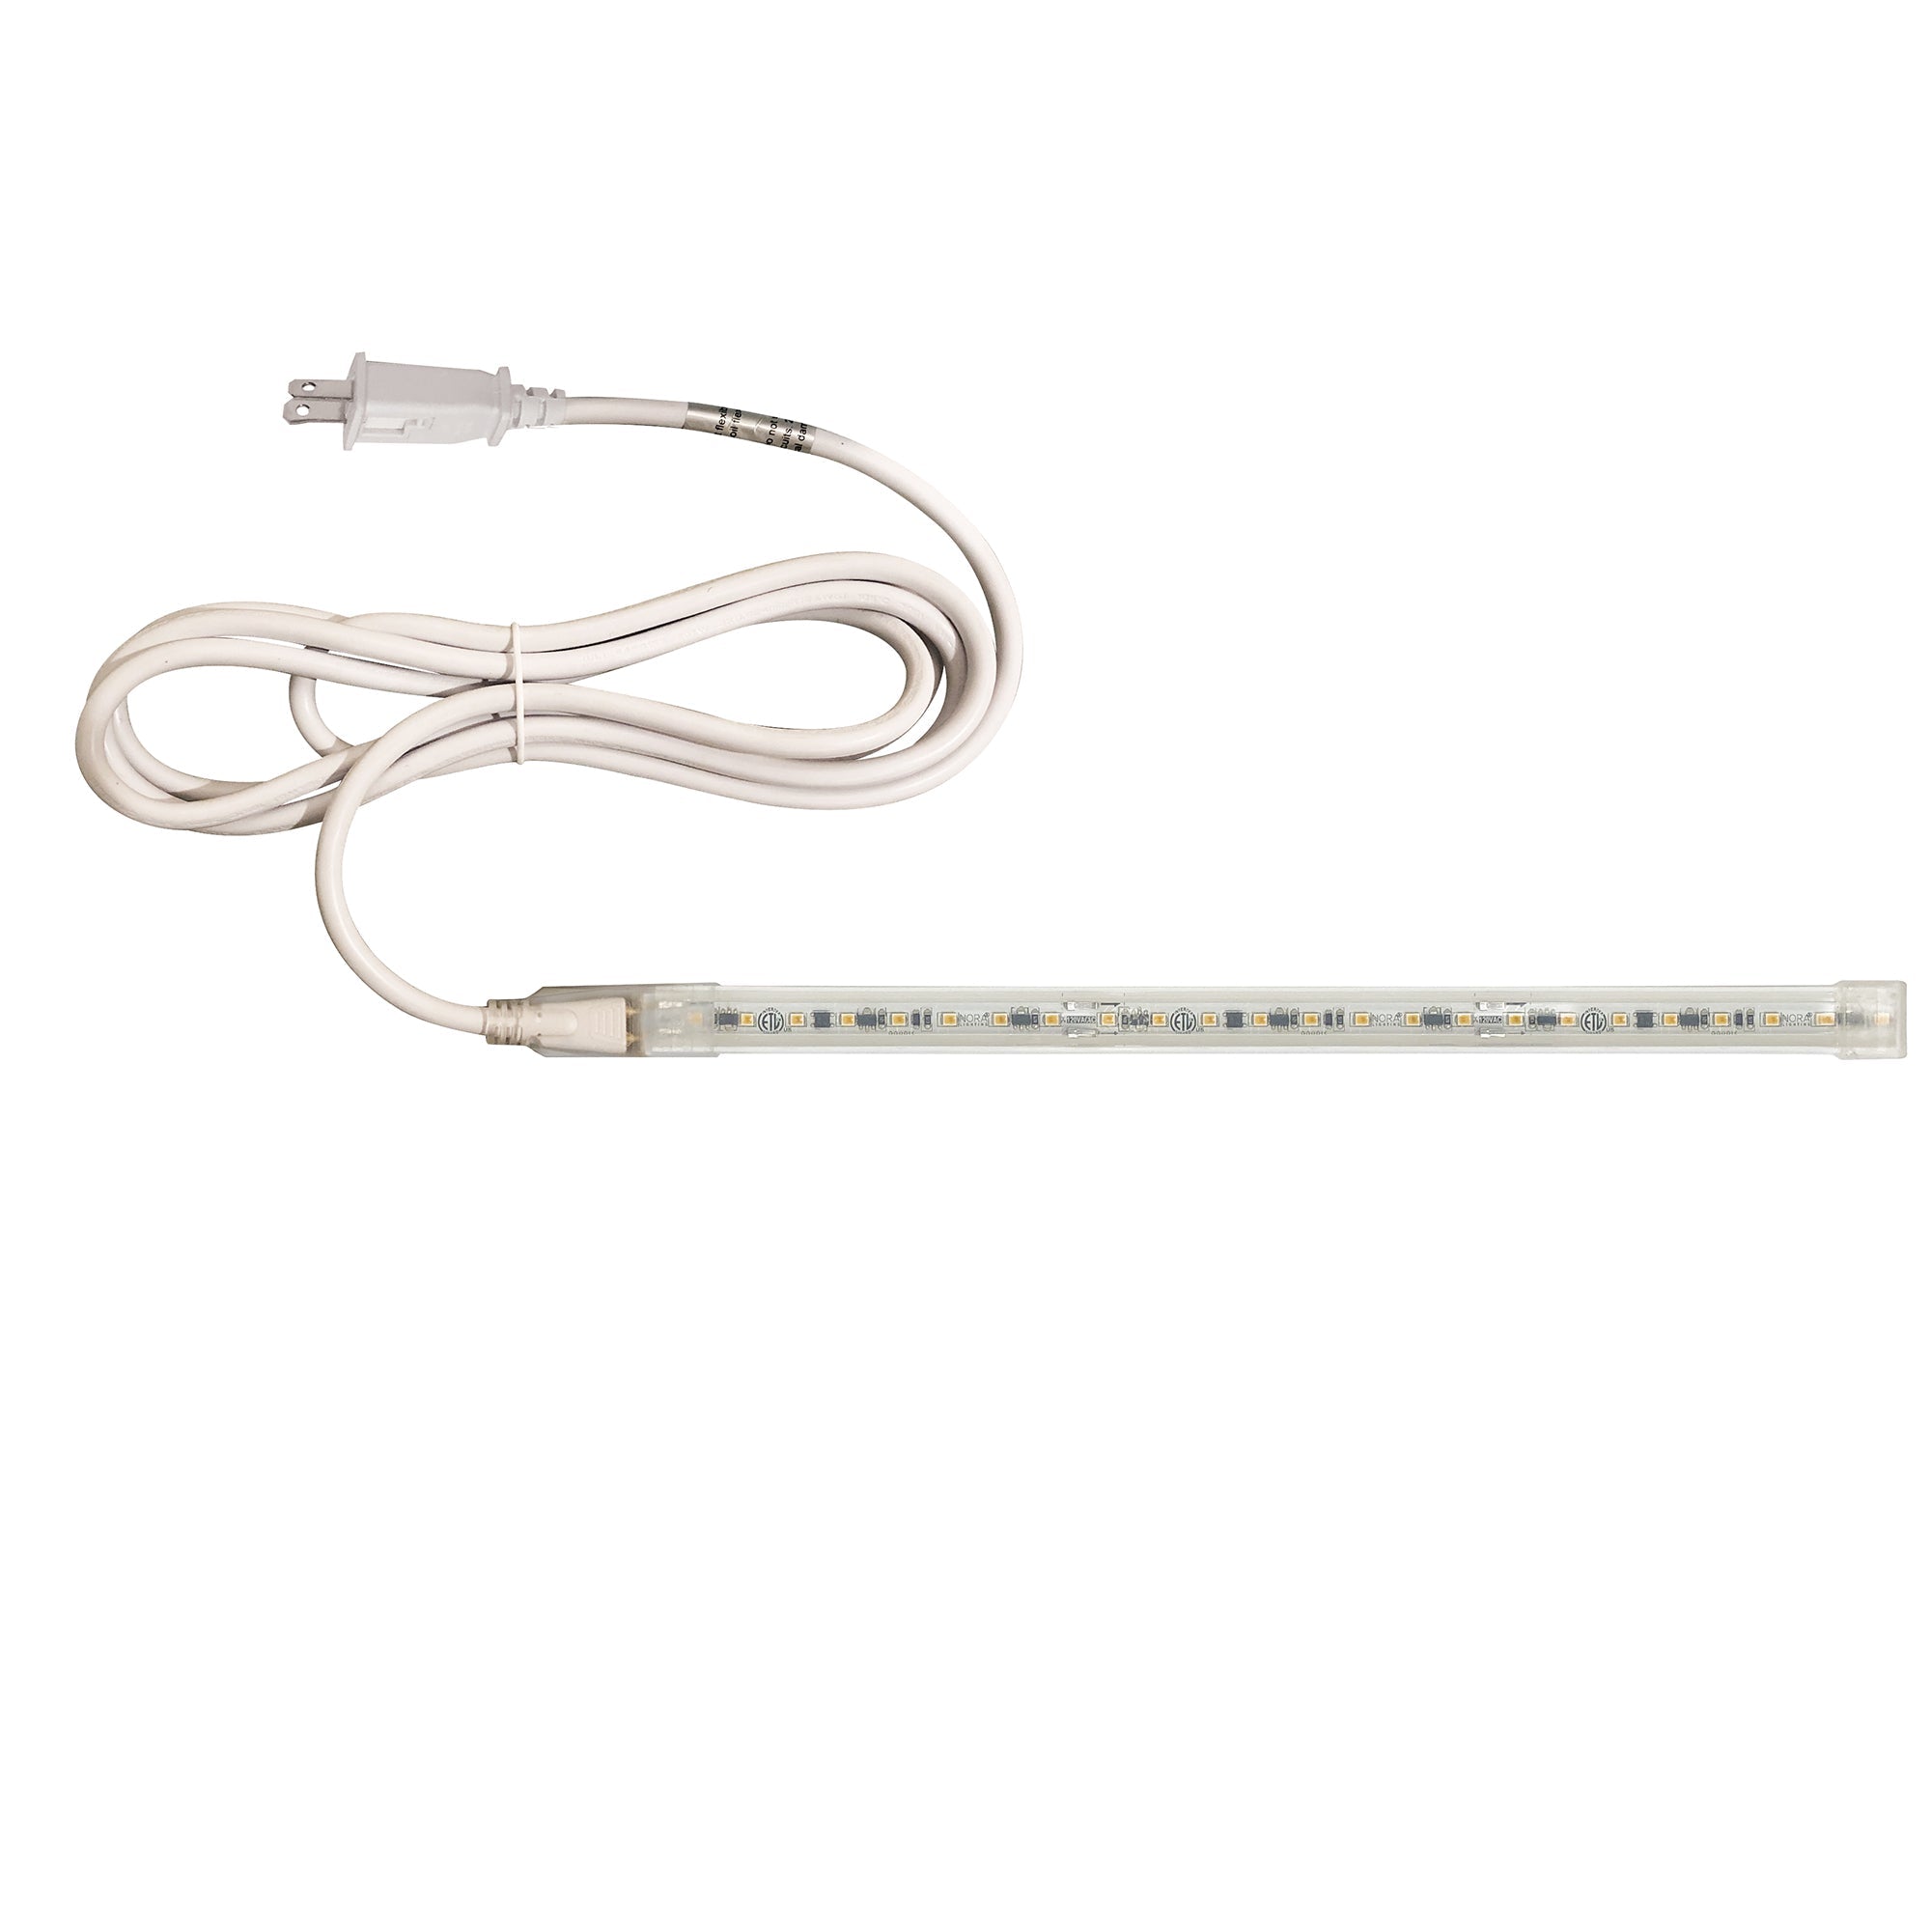 Nora Lighting NUTP13-W7-4-12-930/CP - Accent / Undercabinet - Custom Cut 7-ft, 4-in 120V Continuous LED Tape Light, 330lm / 3.6W per foot, 3000K, w/ Mounting Clips and 8' Cord & Plug